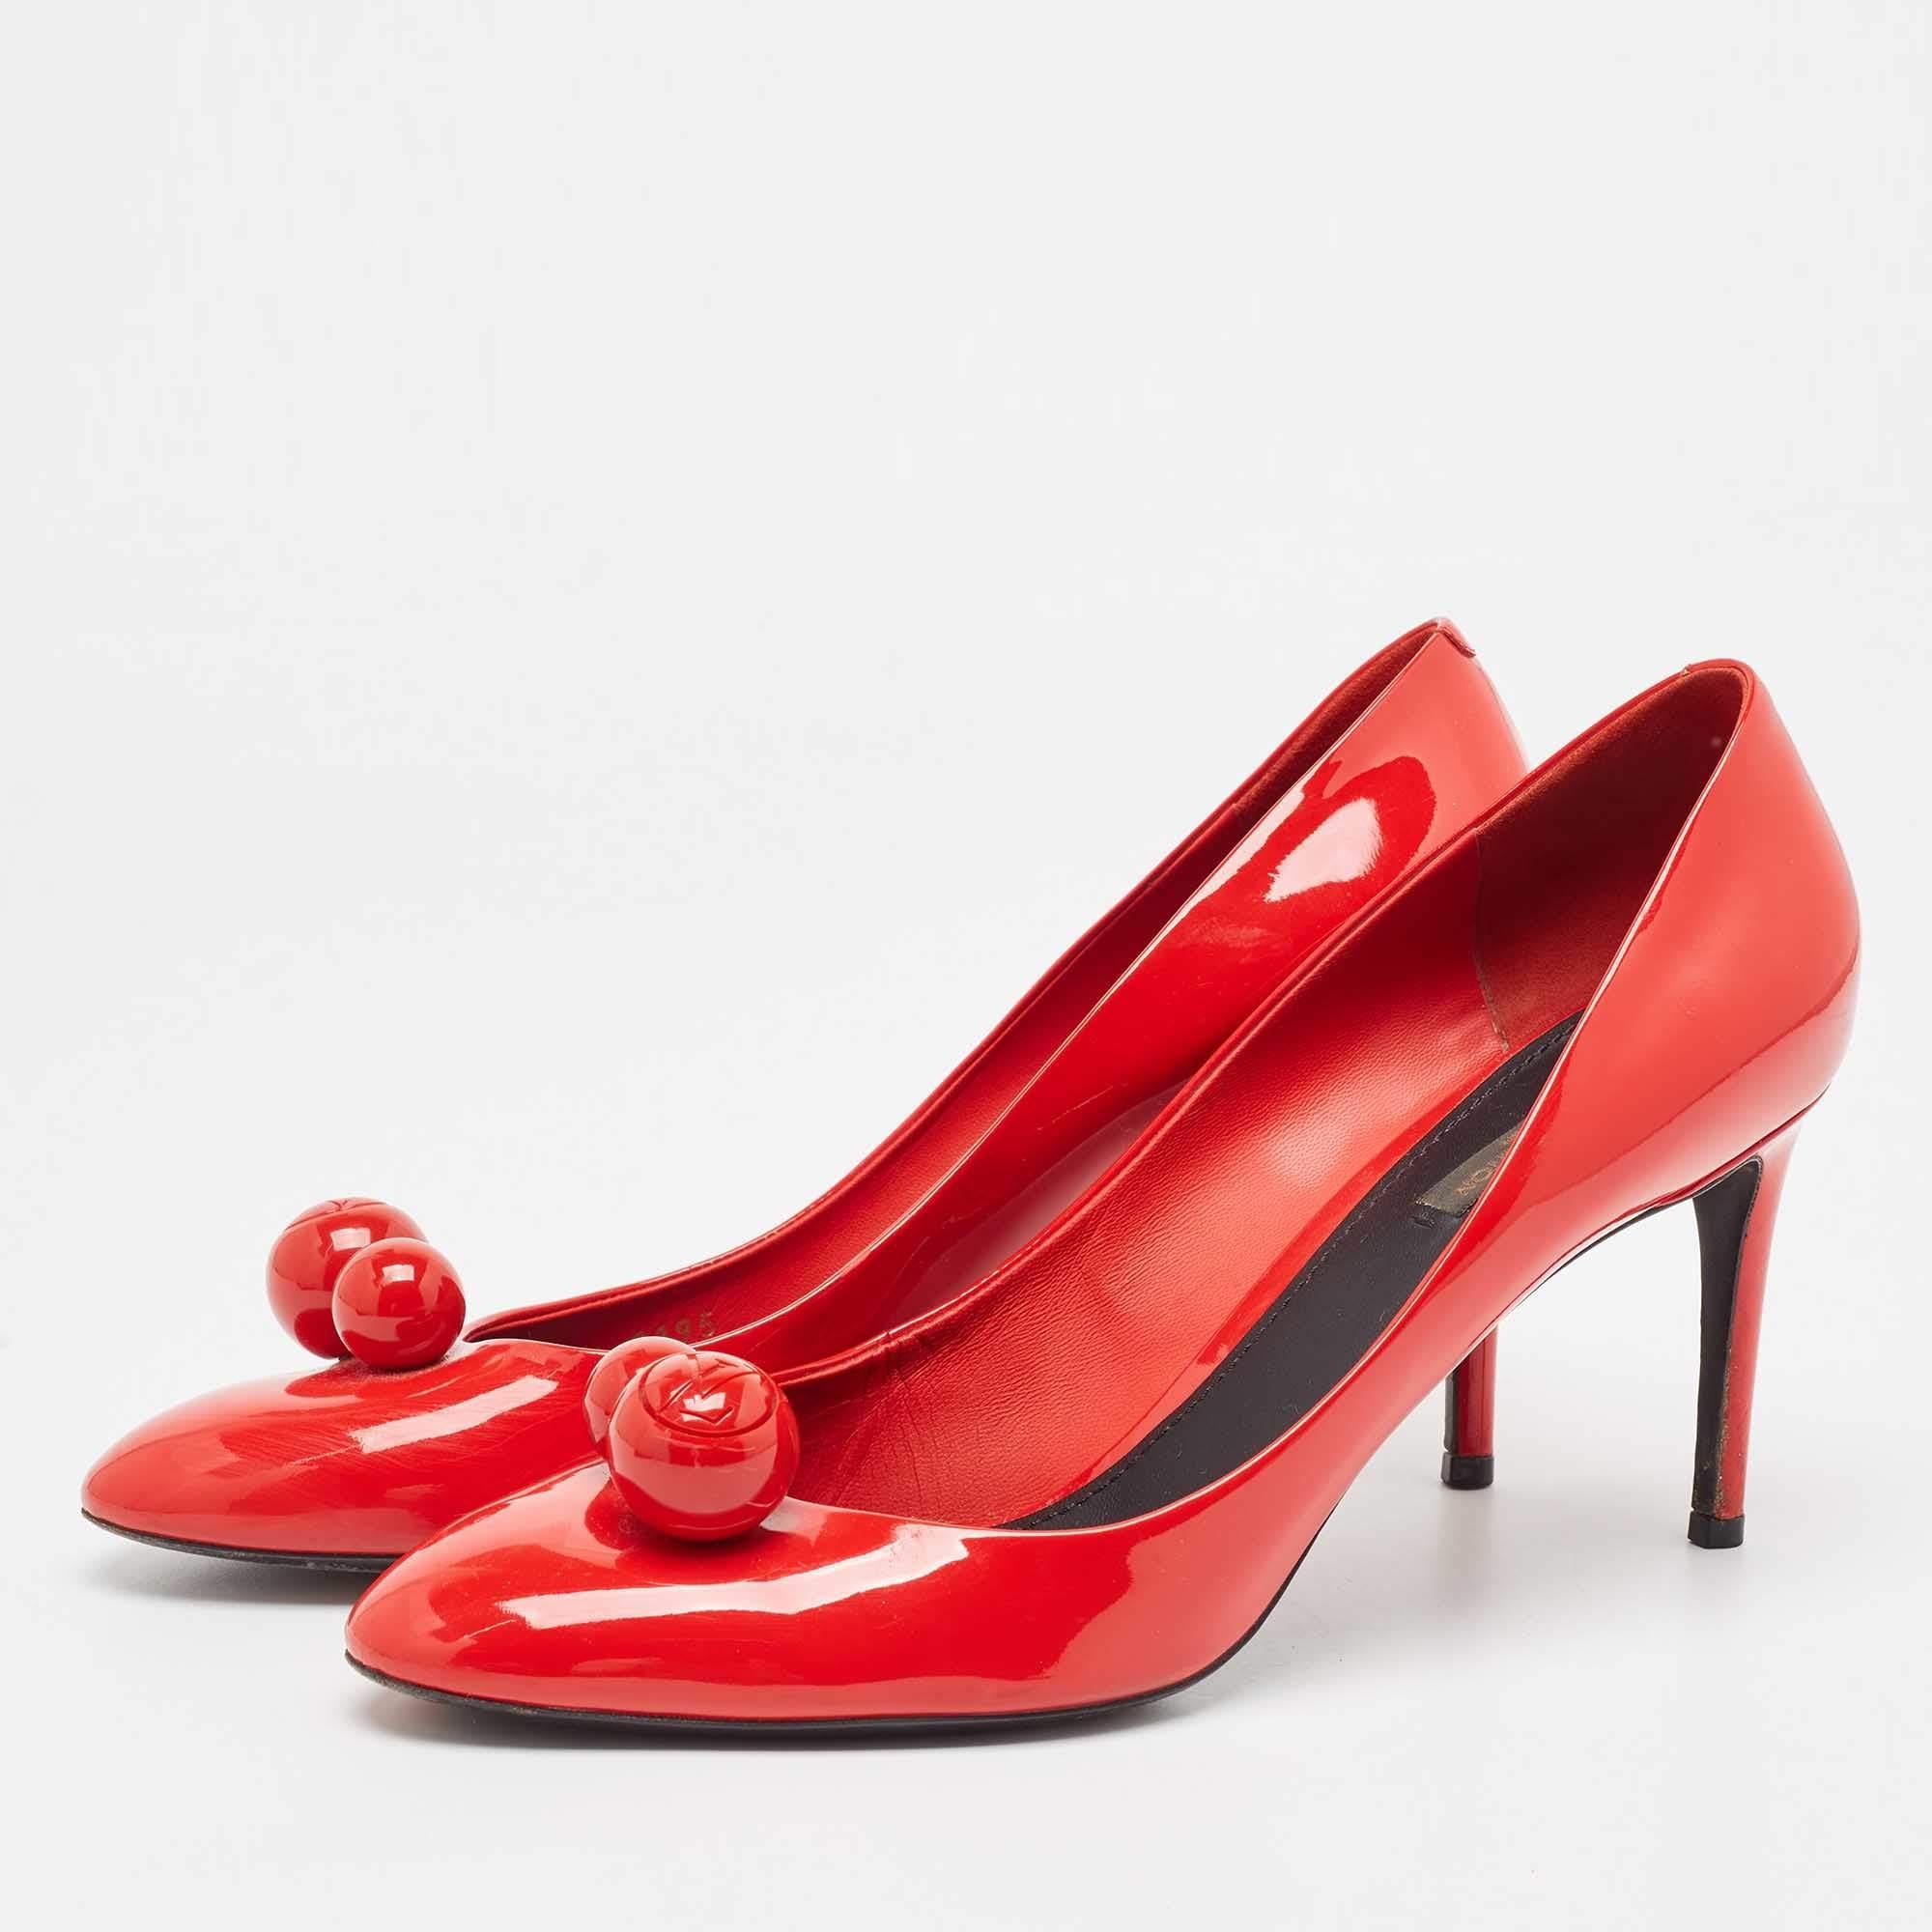 Perfectly sewn and finished to ensure an elegant look and fit, these Louis Vuitton red pumps are a purchase you'll love flaunting. They look great on the feet.

